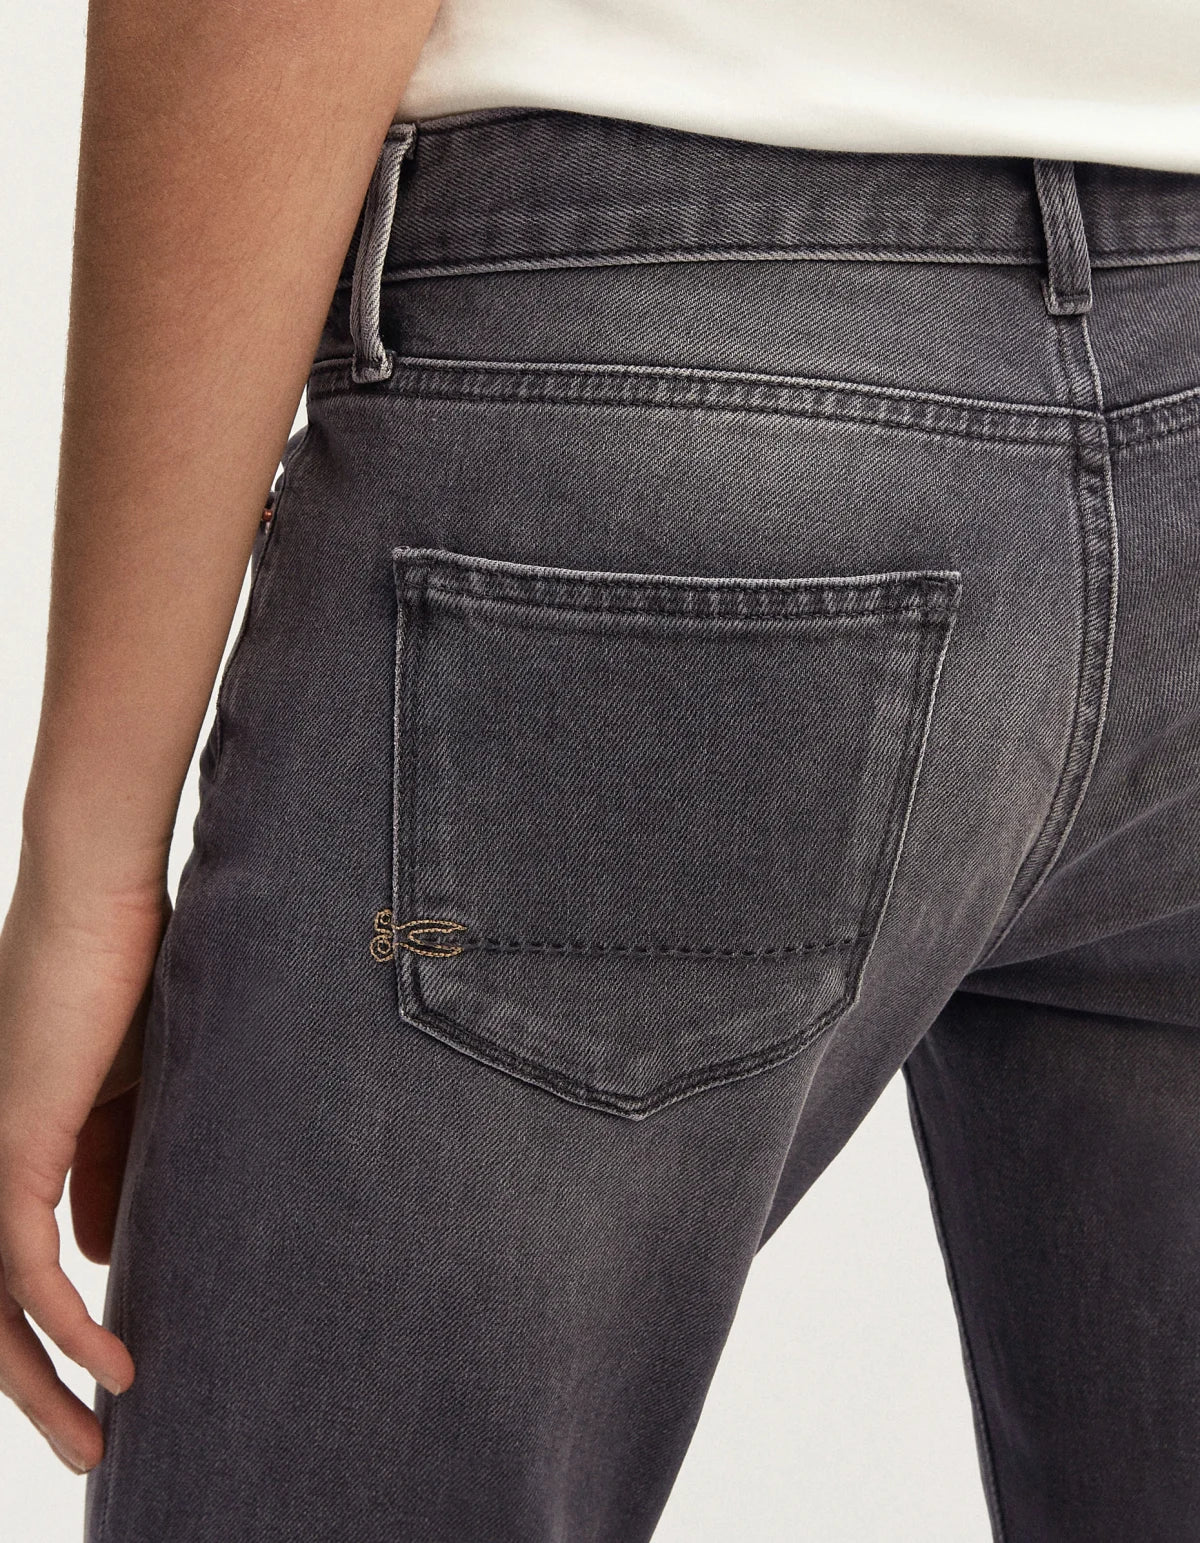 The back view of a woman in a pair of MONROE - Authentic Grey Wash jeans from Denham's Authentics range.